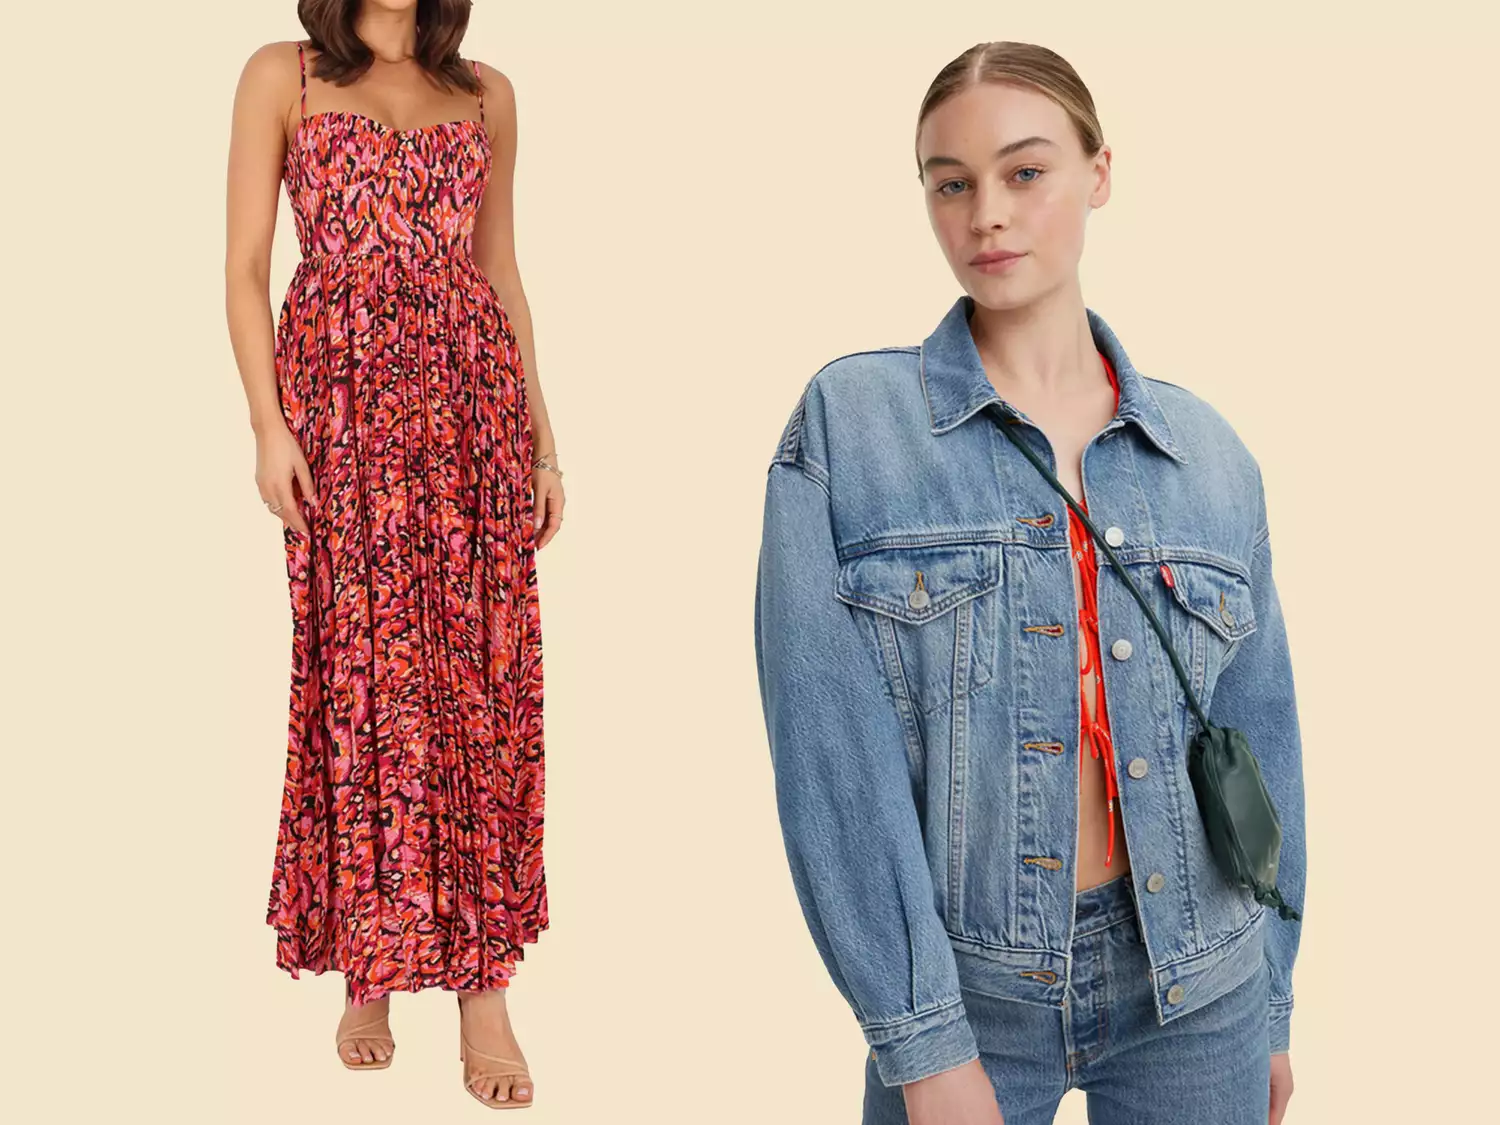 I’m My Mom’s Personal Shopper, and I’m Styling Her in Levi’s and Tory Burch for Spring